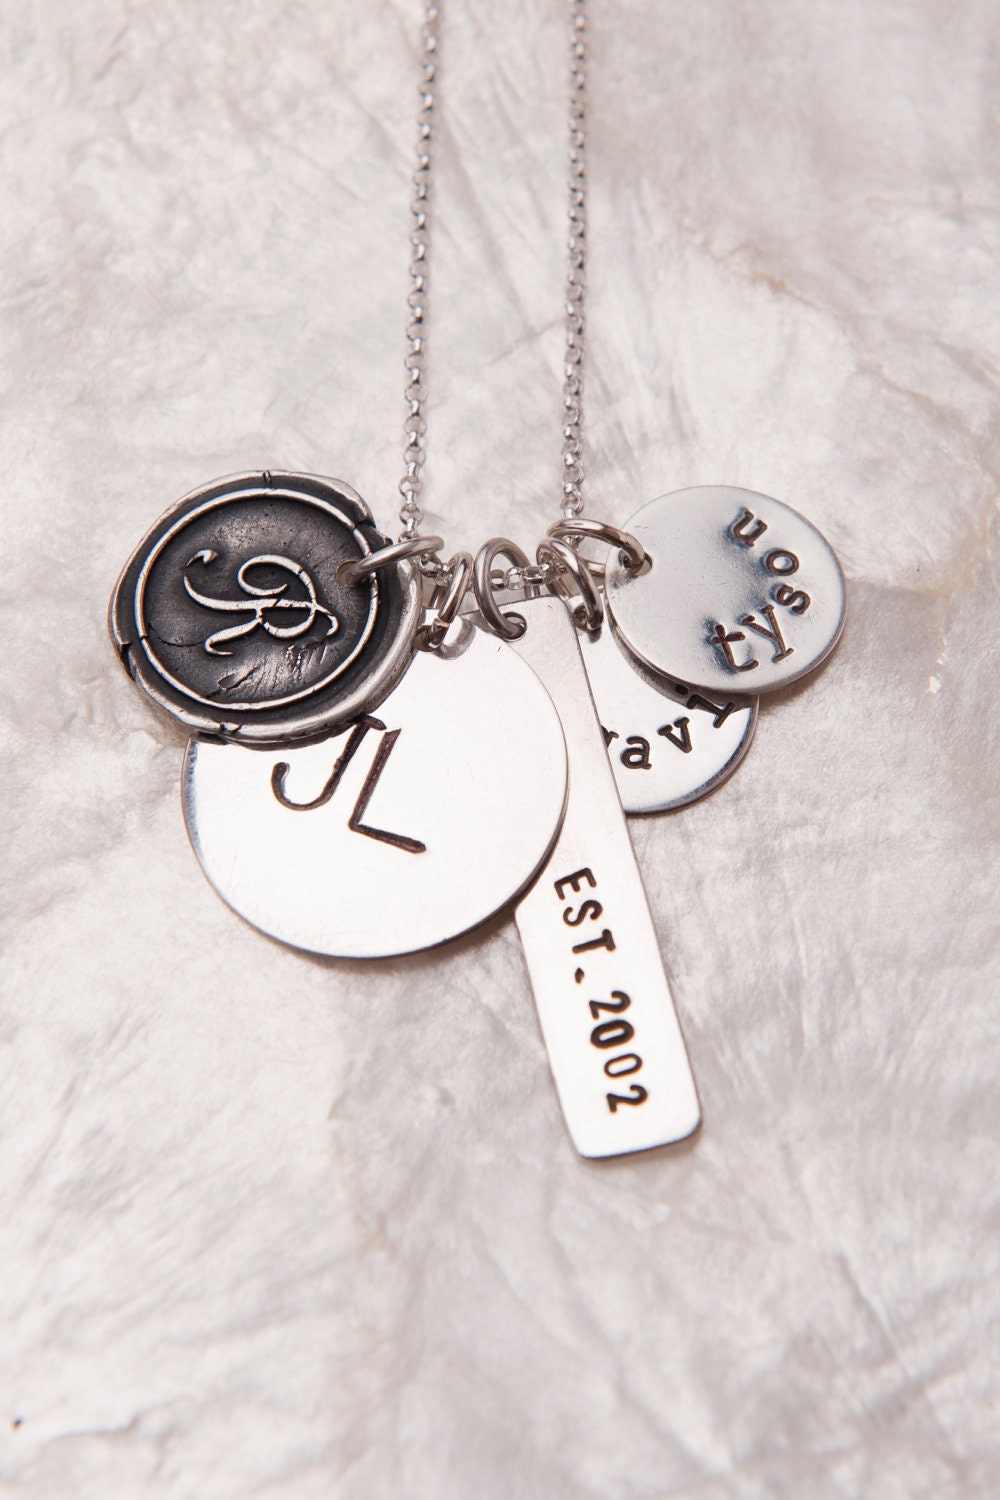 Family Necklace on Foundations Necklace For Mom  Family Necklace  Charm Necklaces For